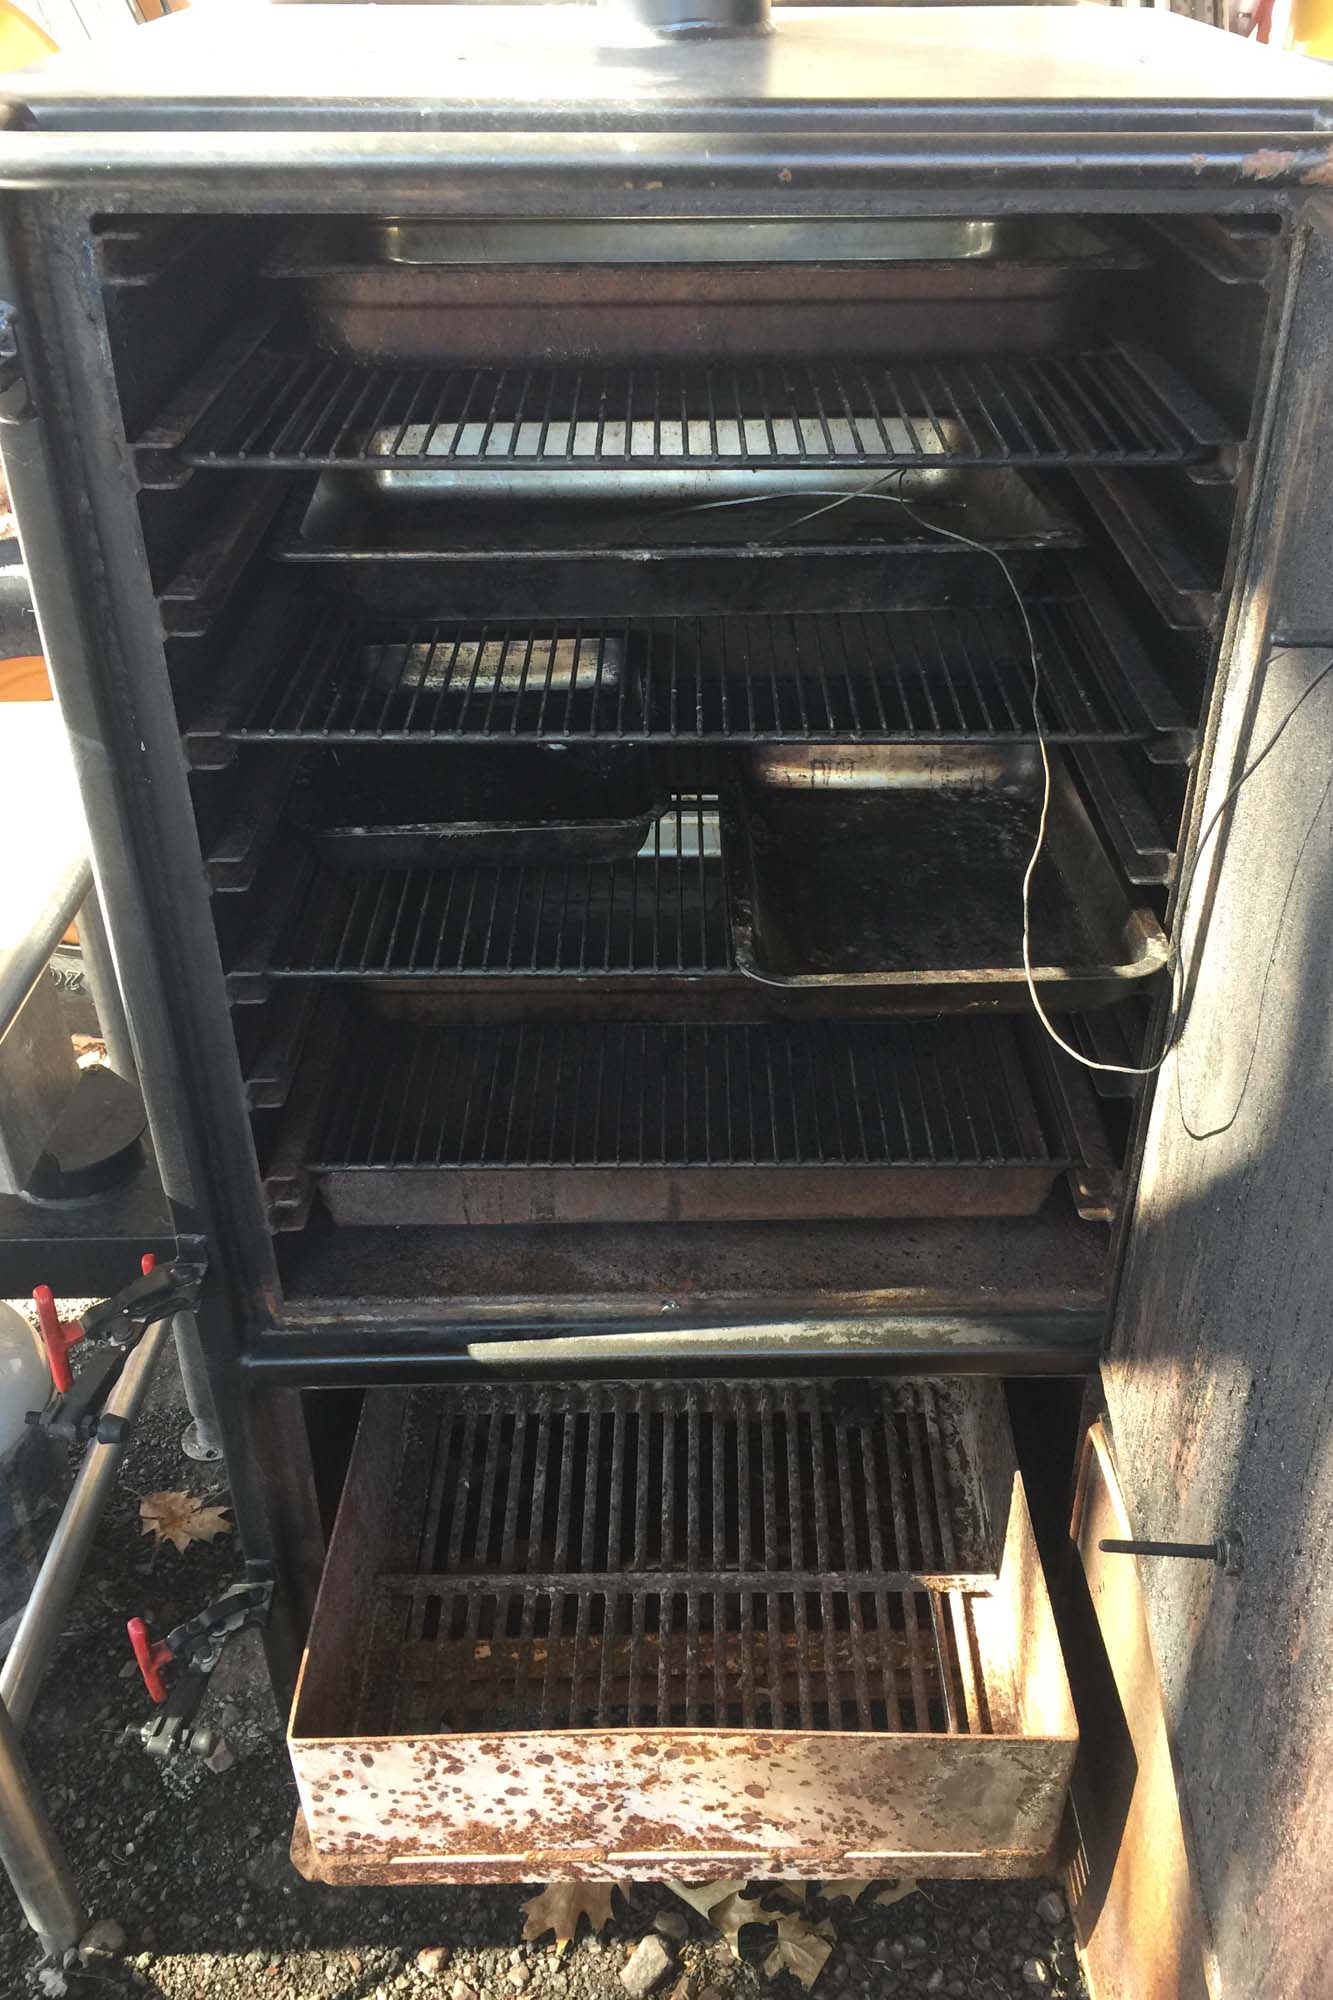 Meadow Creek BX50 Box Smoker used about 10 times